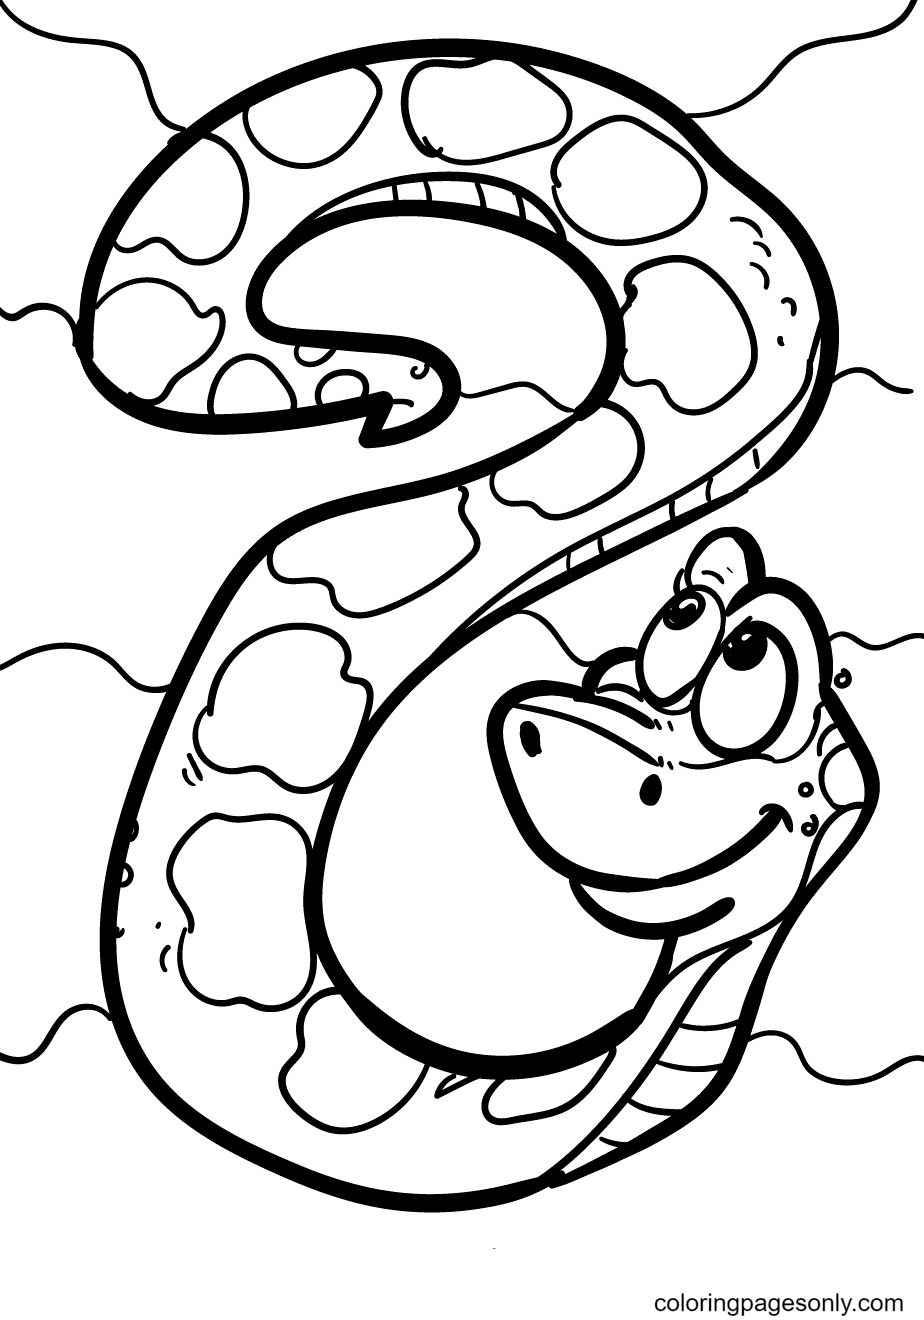 A Friendly Snake Coloring Page